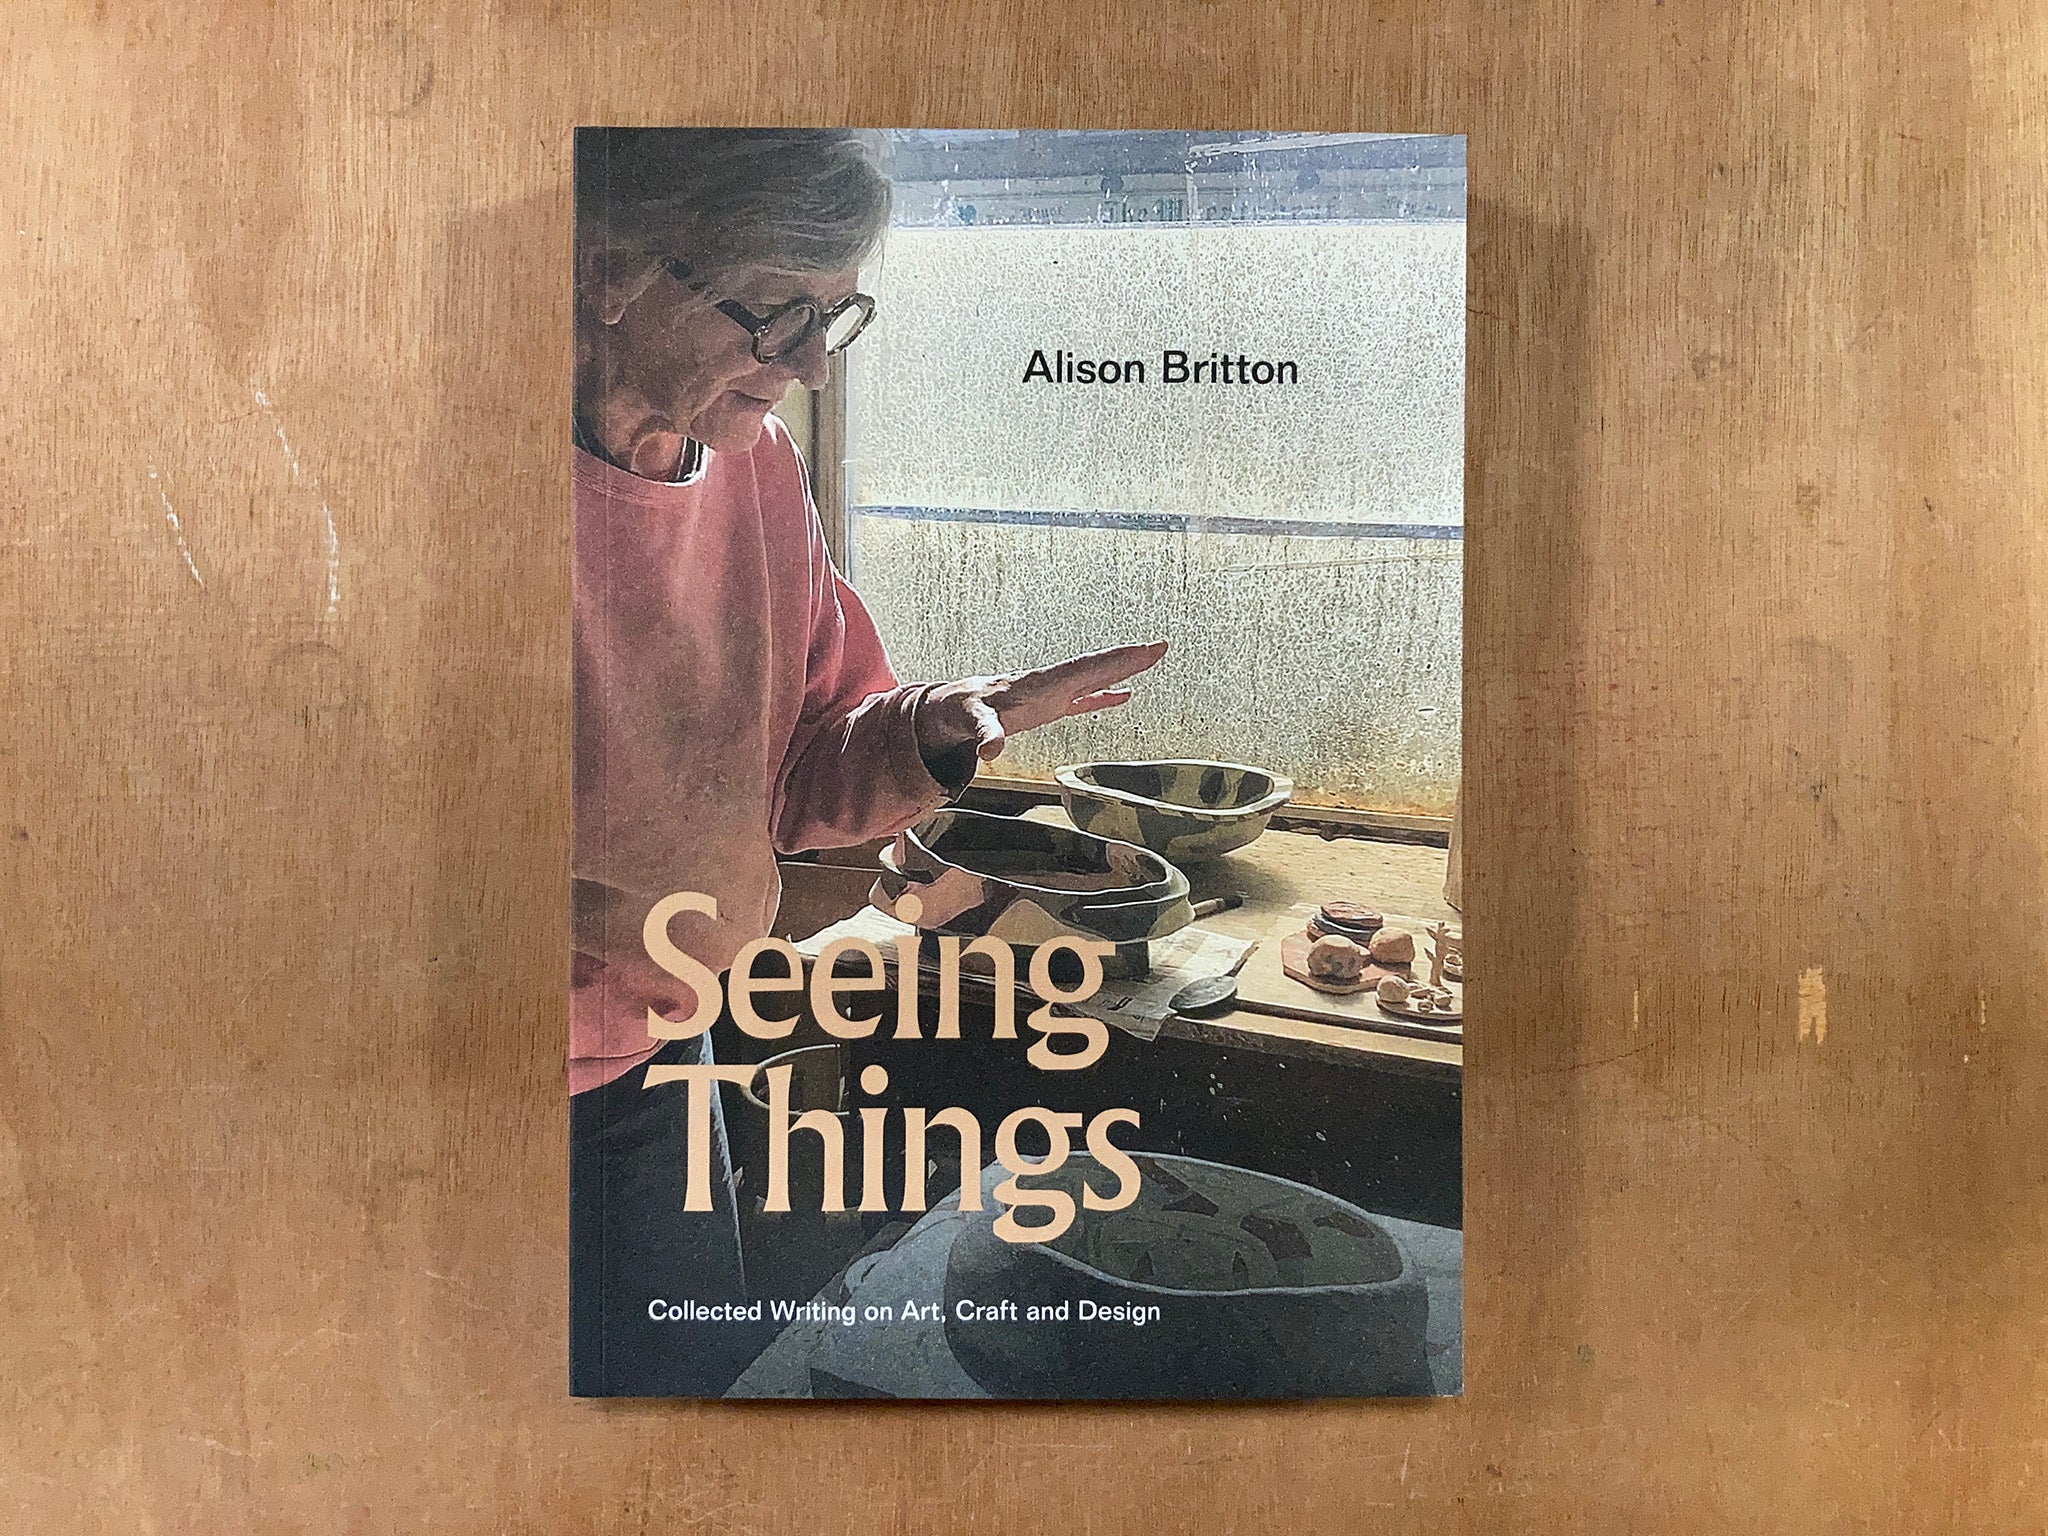 SEEING THINGS by Alison Britton